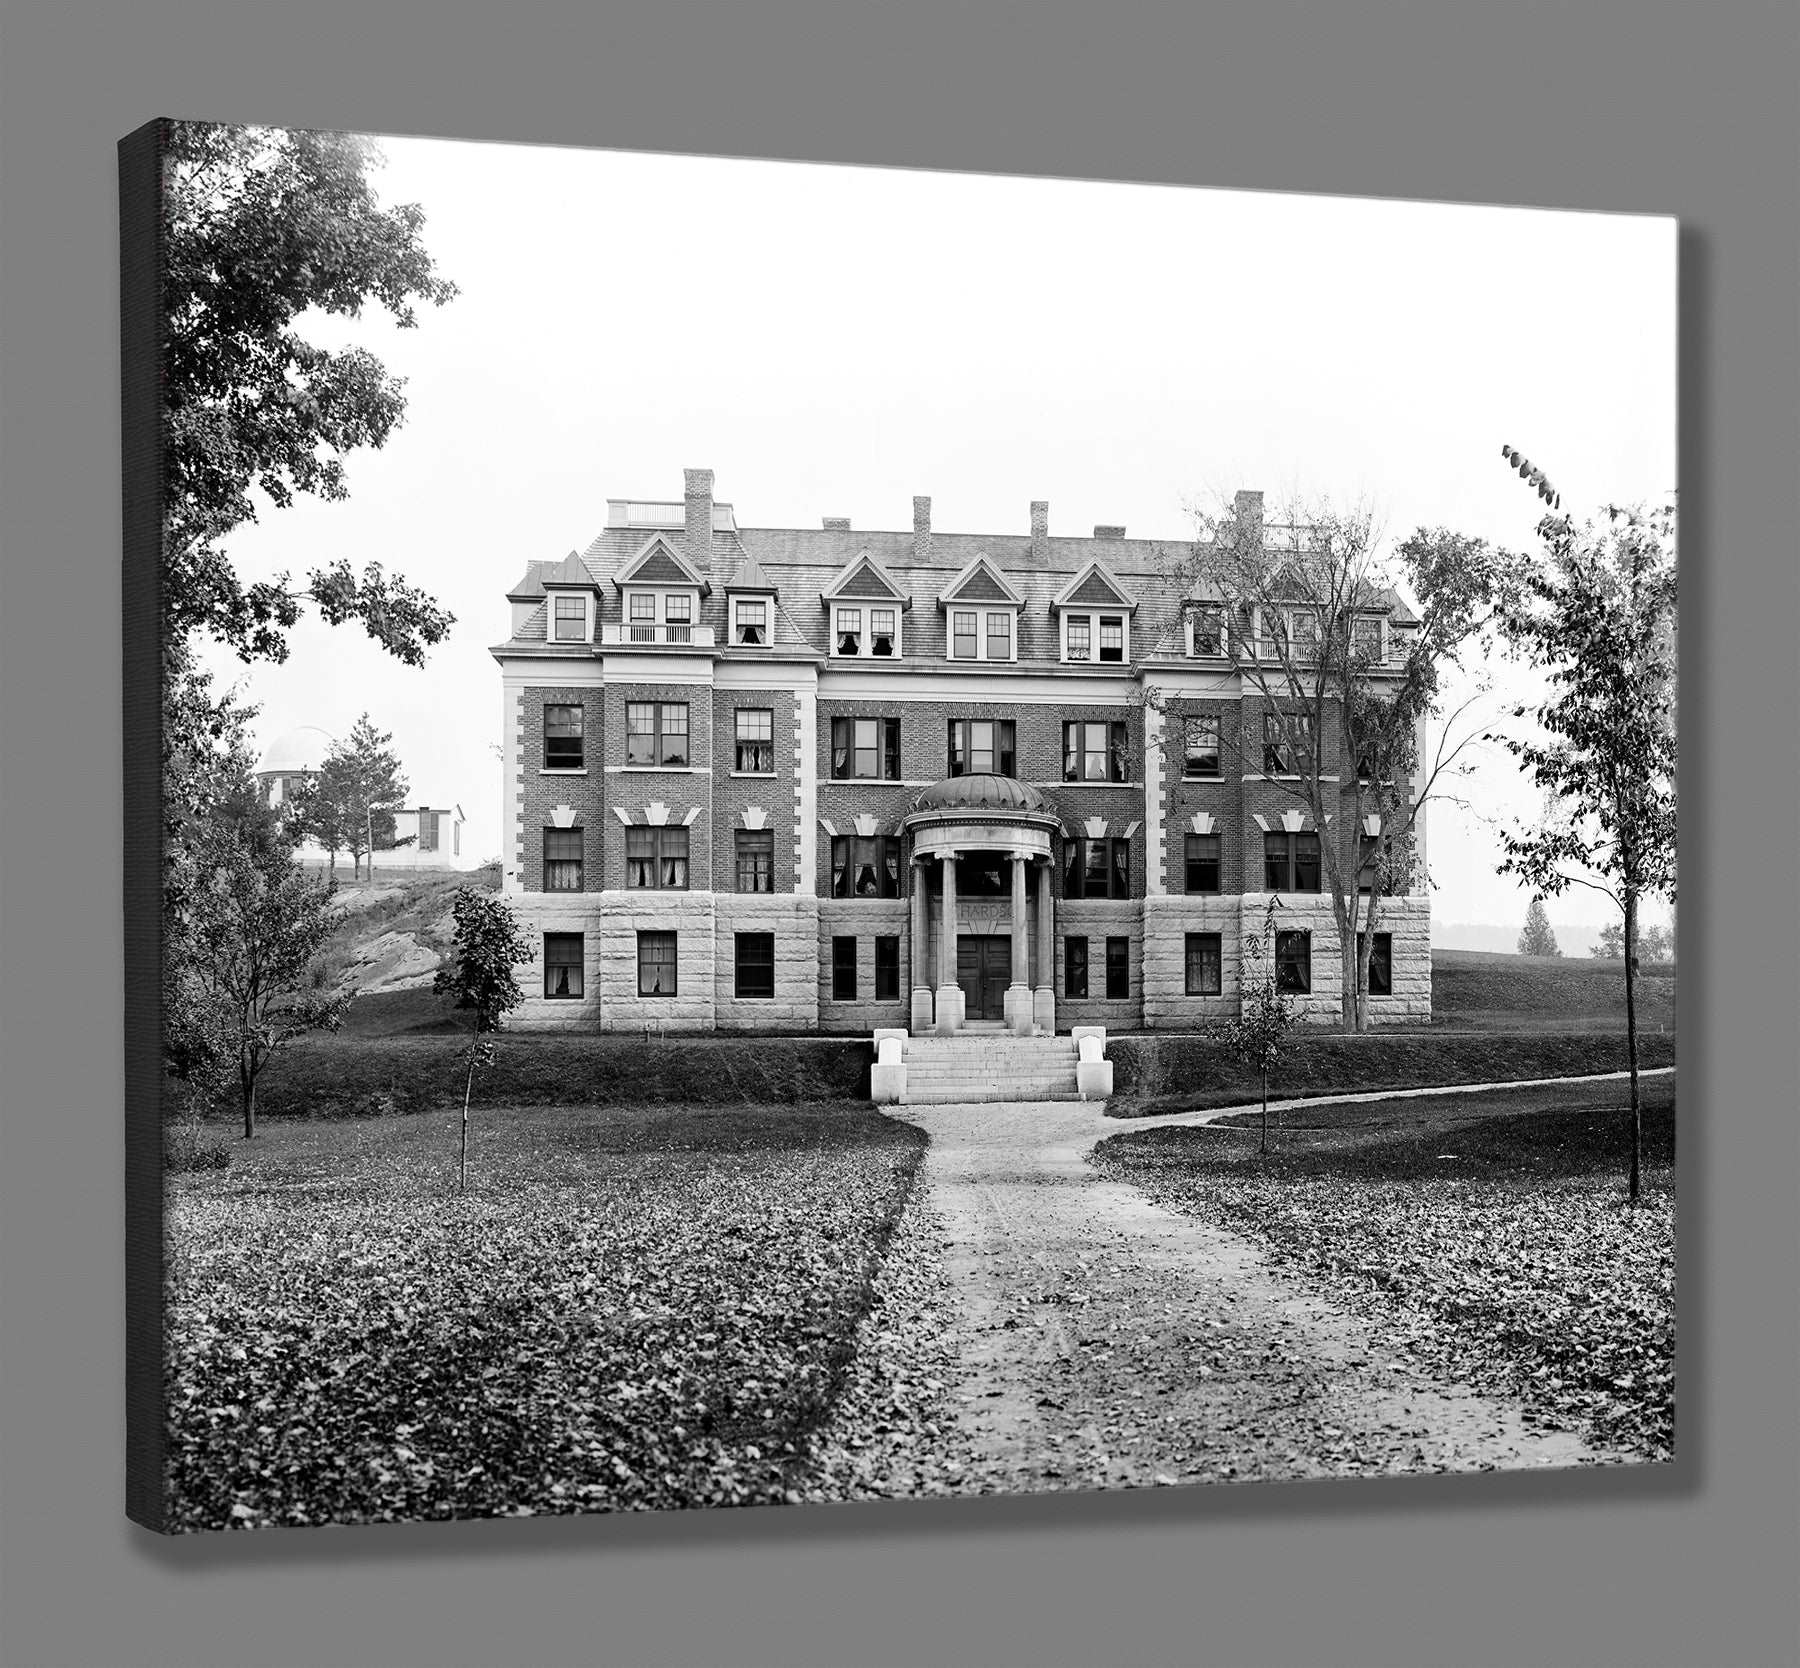 A canvas reproduction print of a vintage photograph of Richardson Hall at Dartmouth